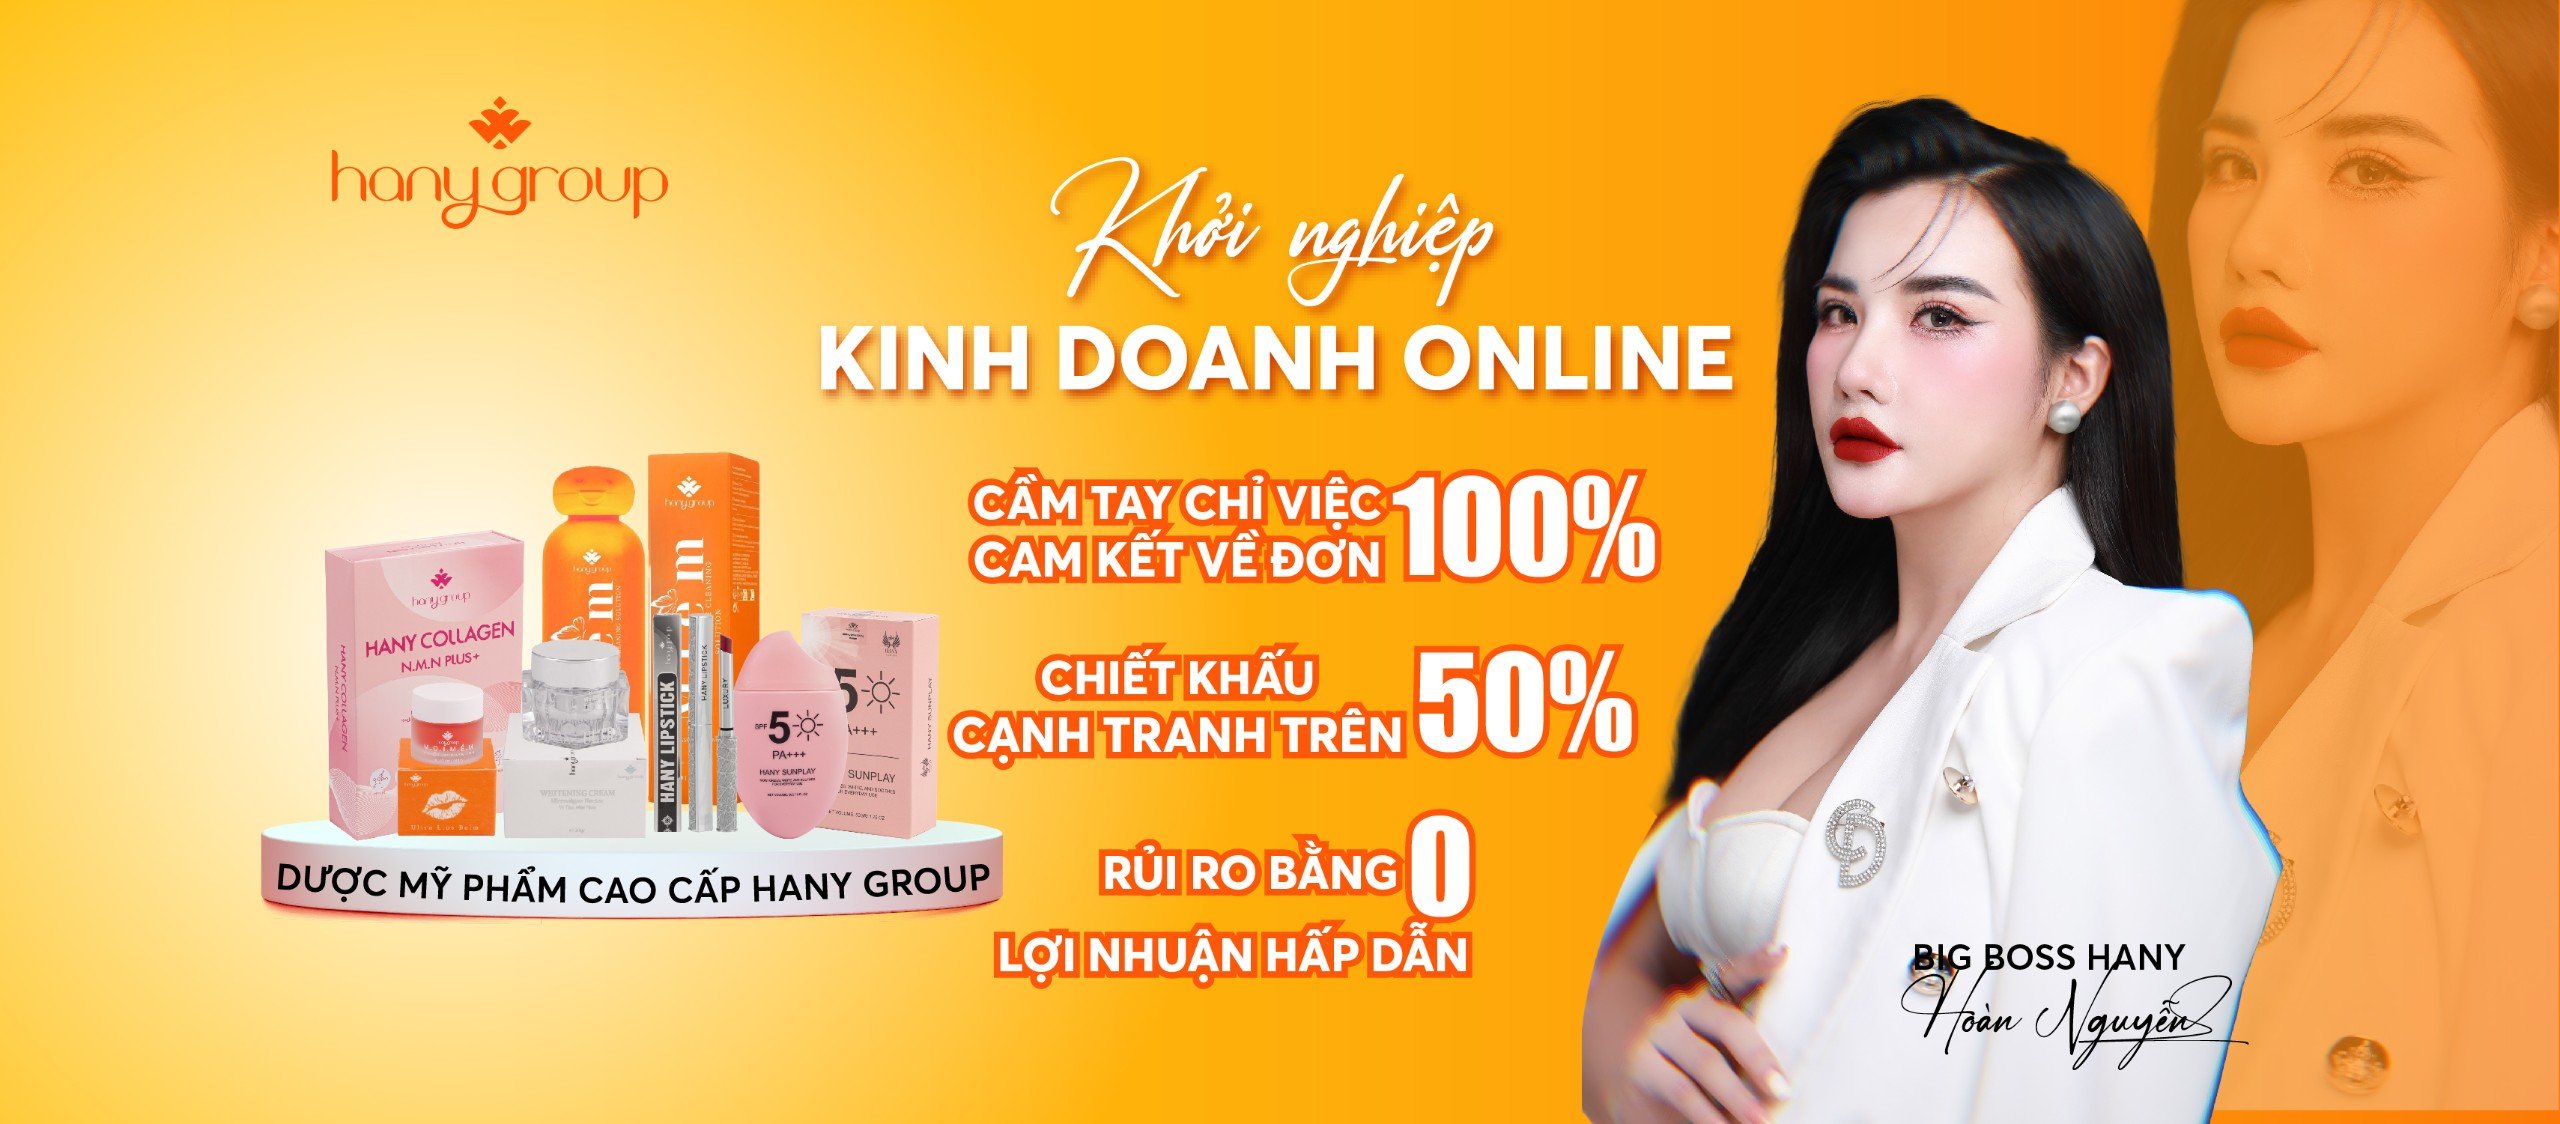 Cover image for HANY GROUP